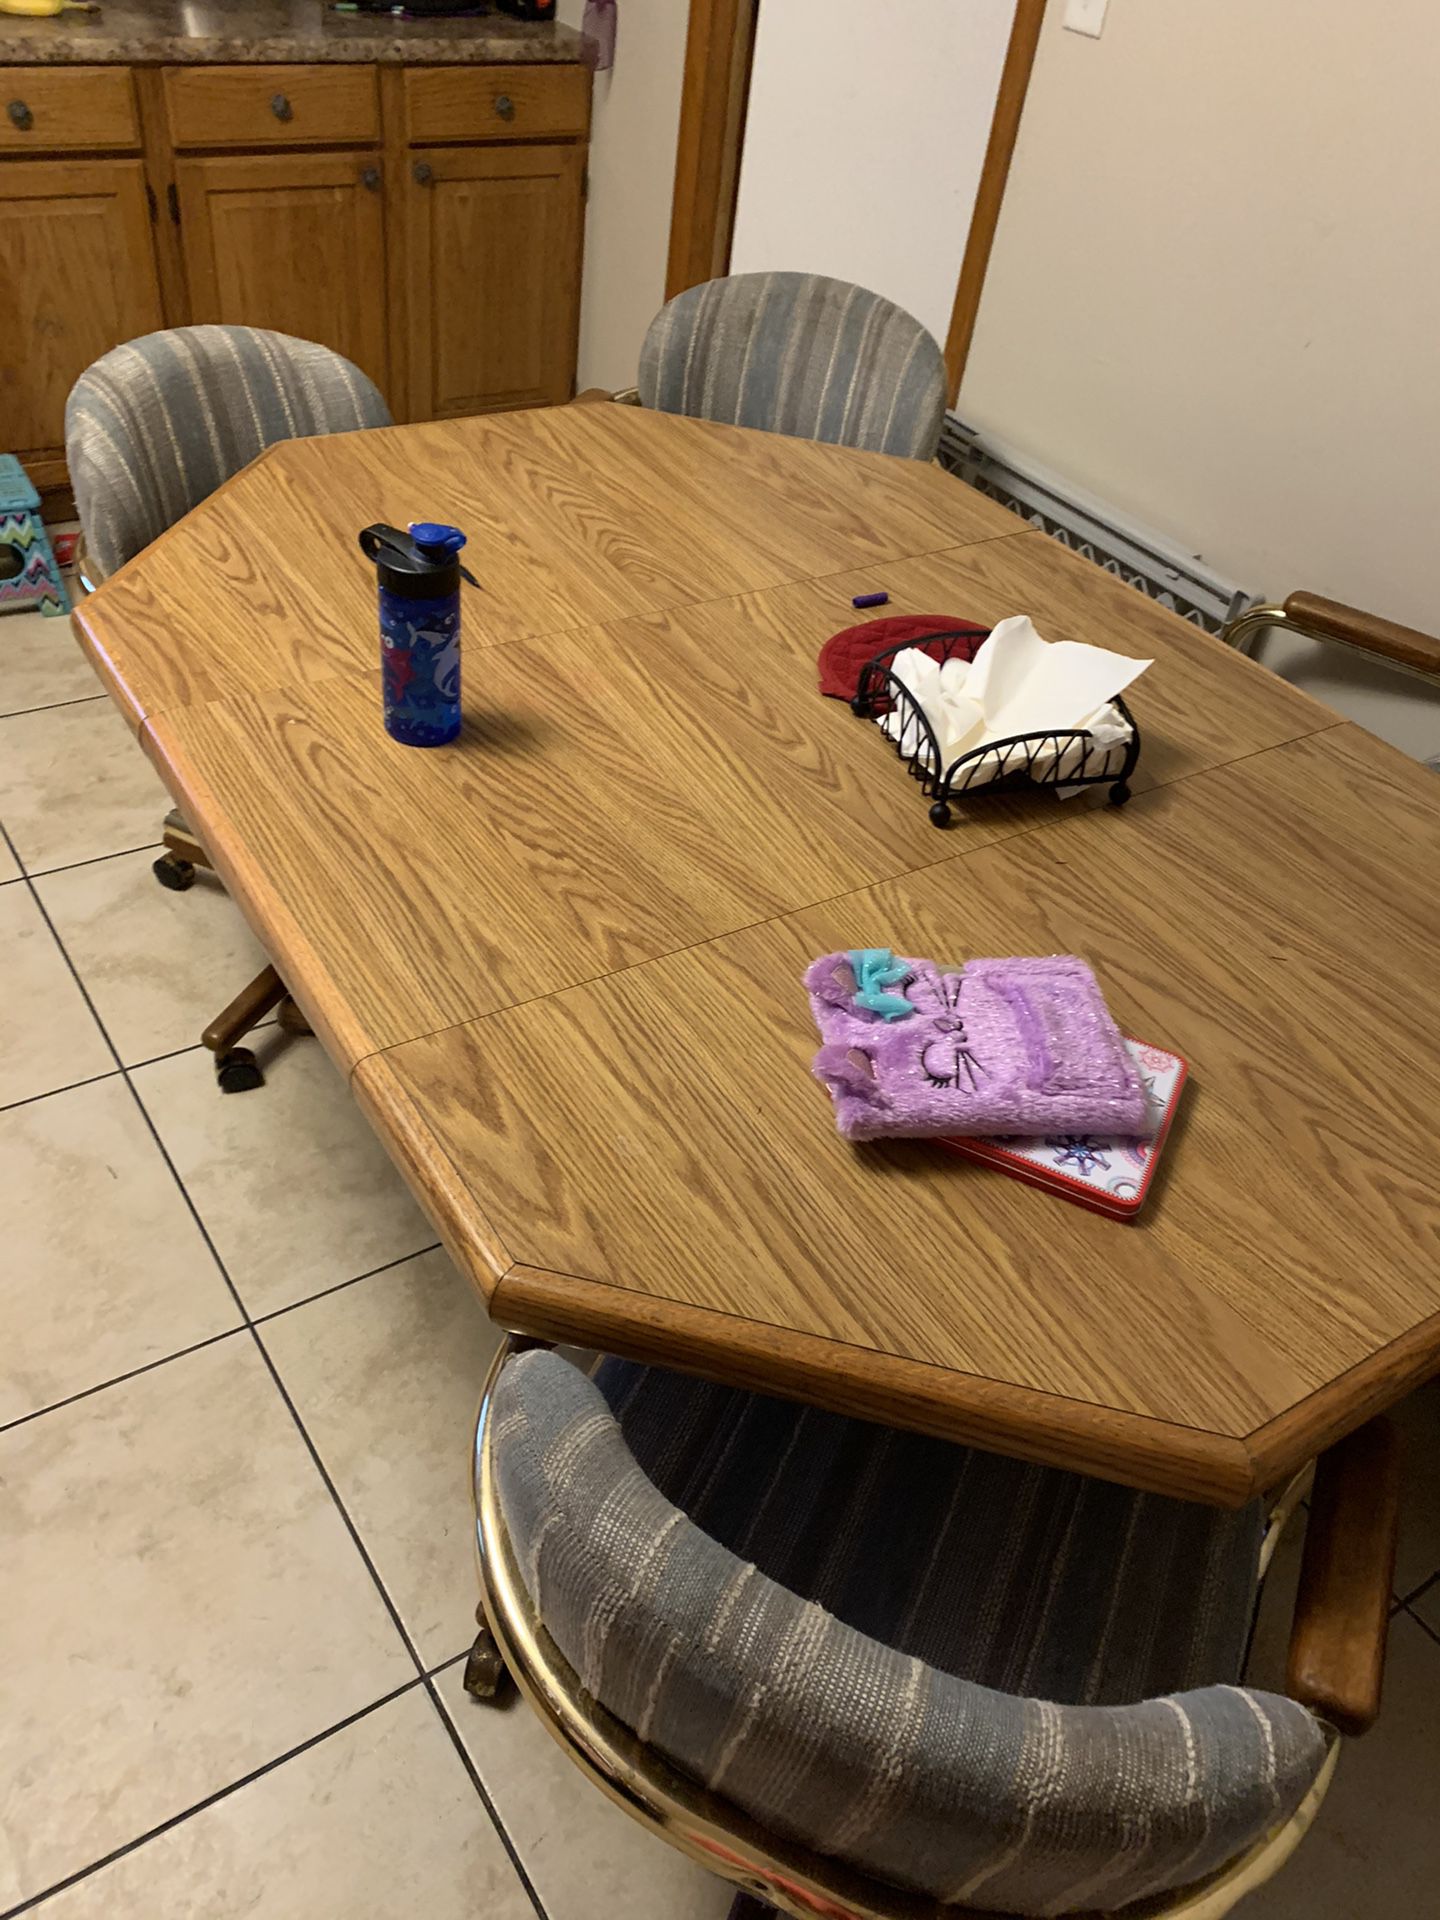 FREE! Kitchen table w/ chairs